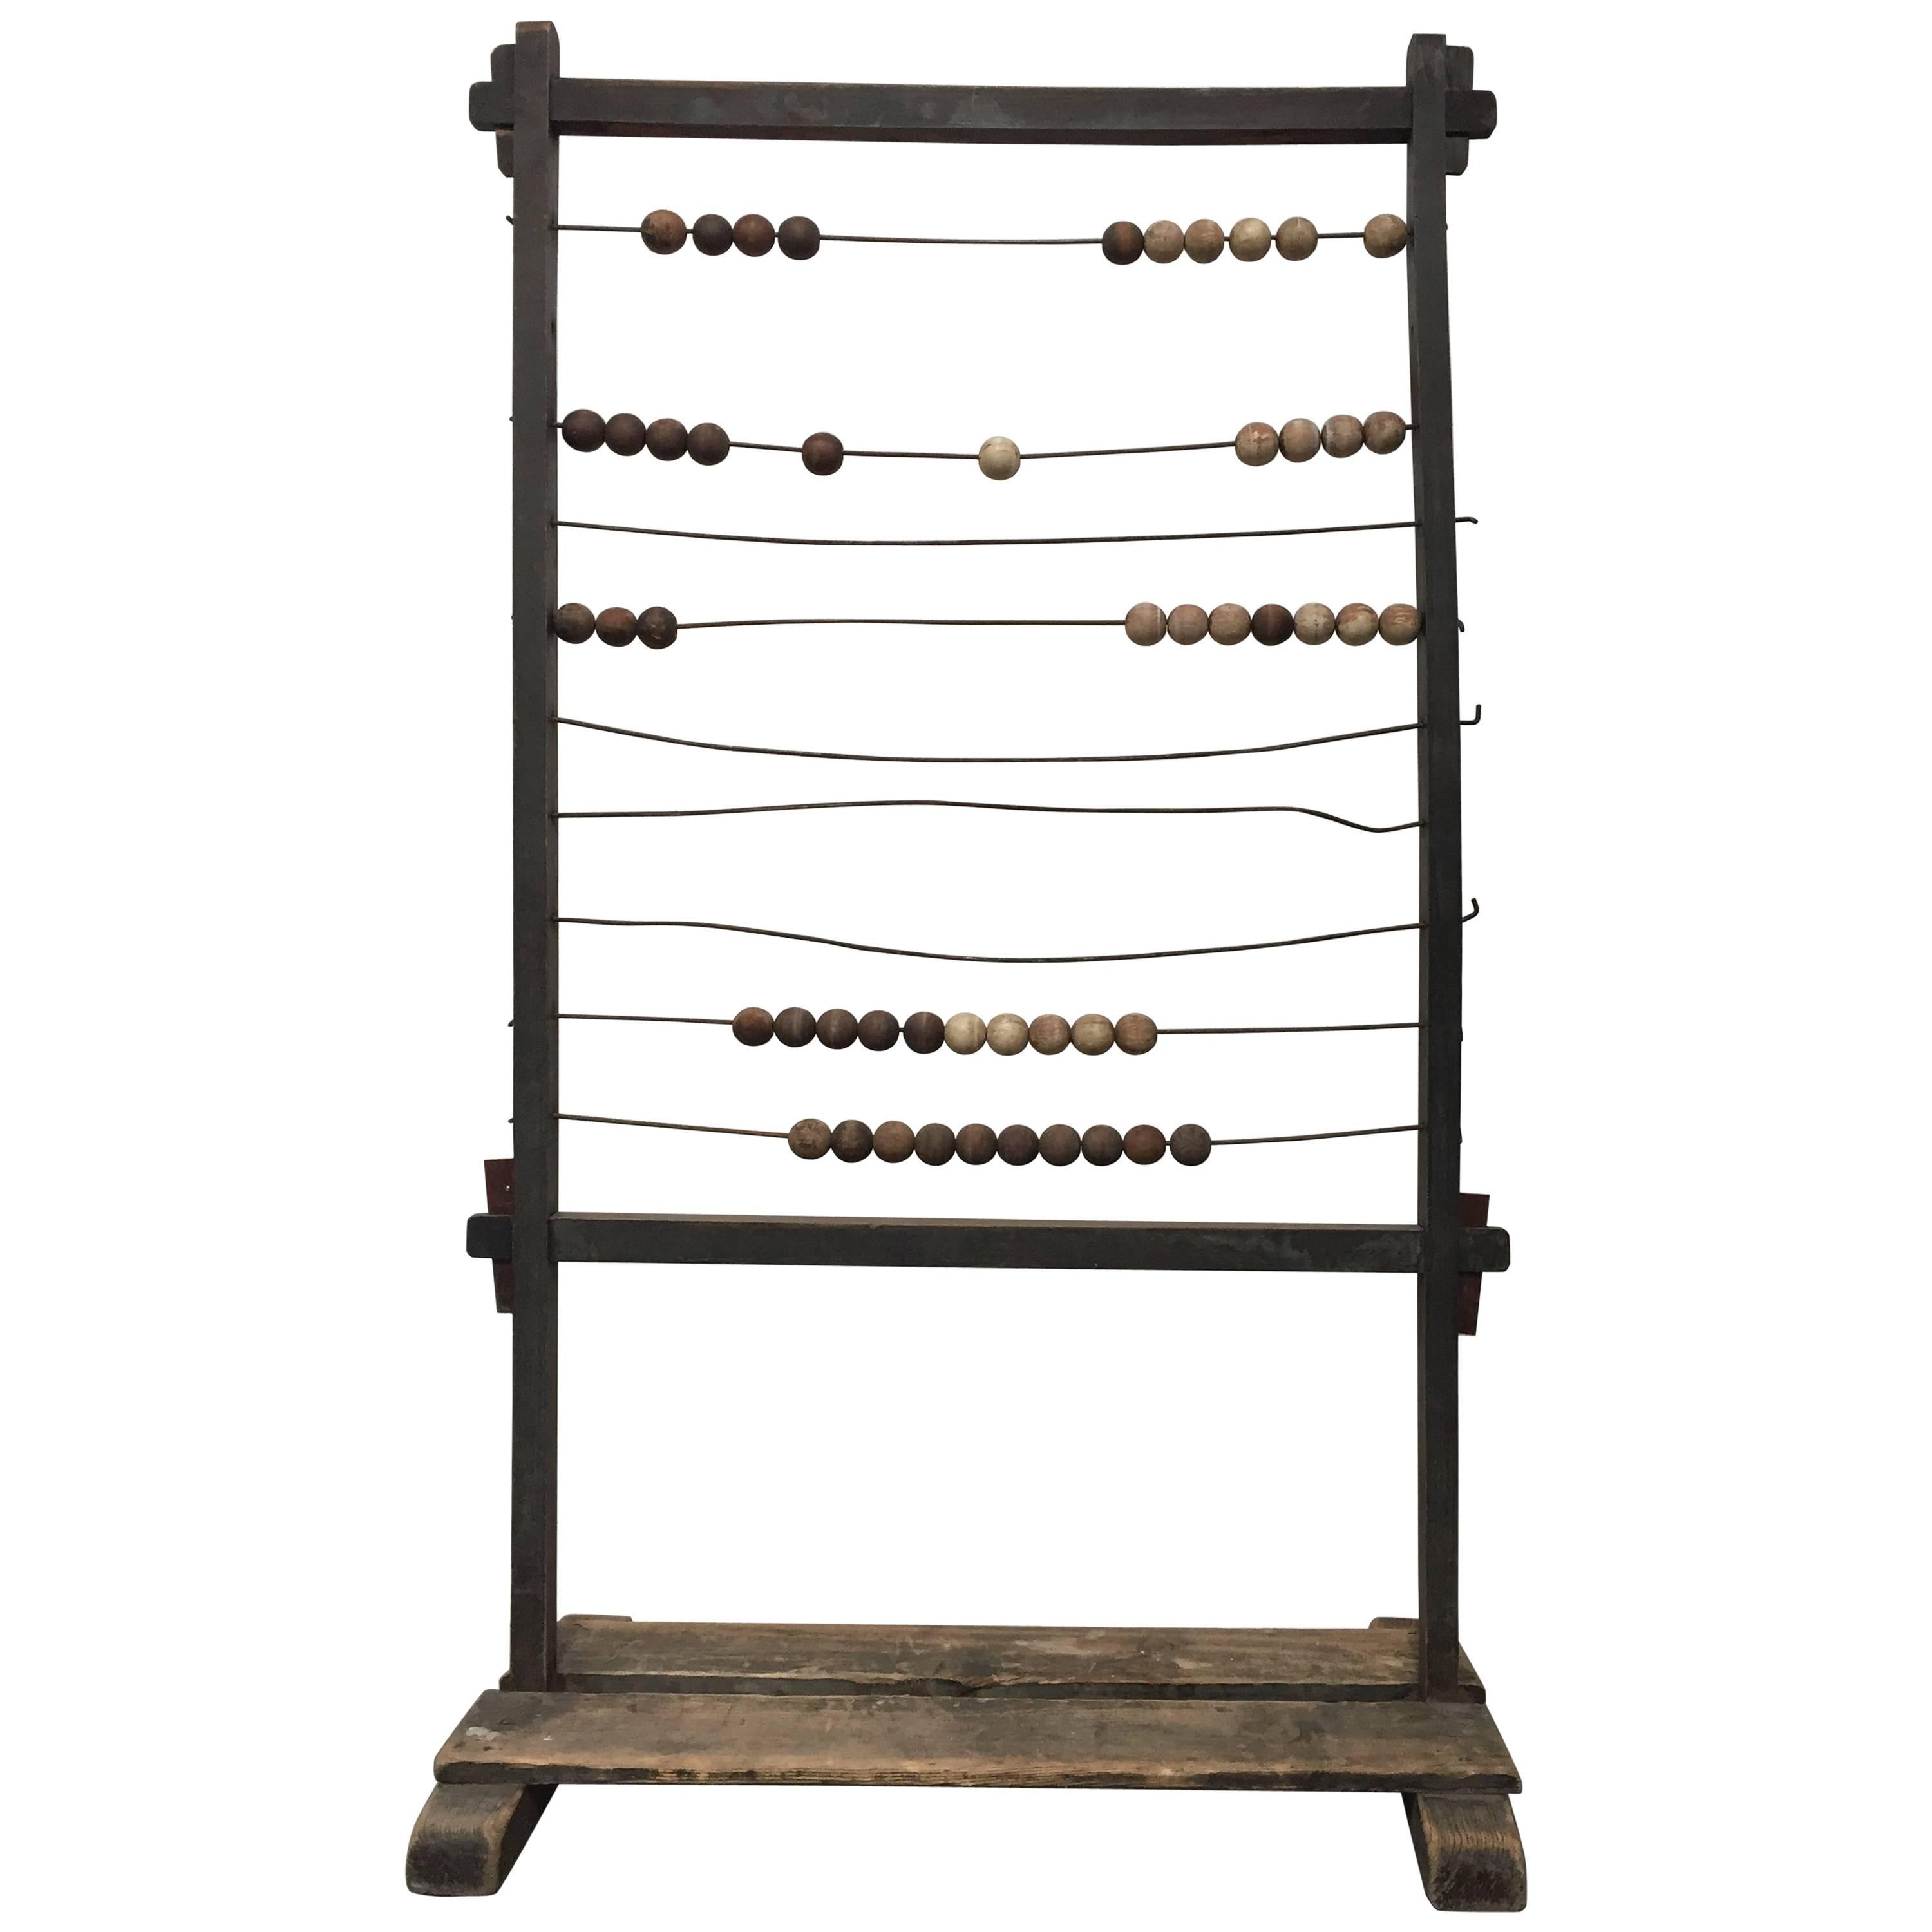 Antique Eastern European School Abacus, Early 20th Century